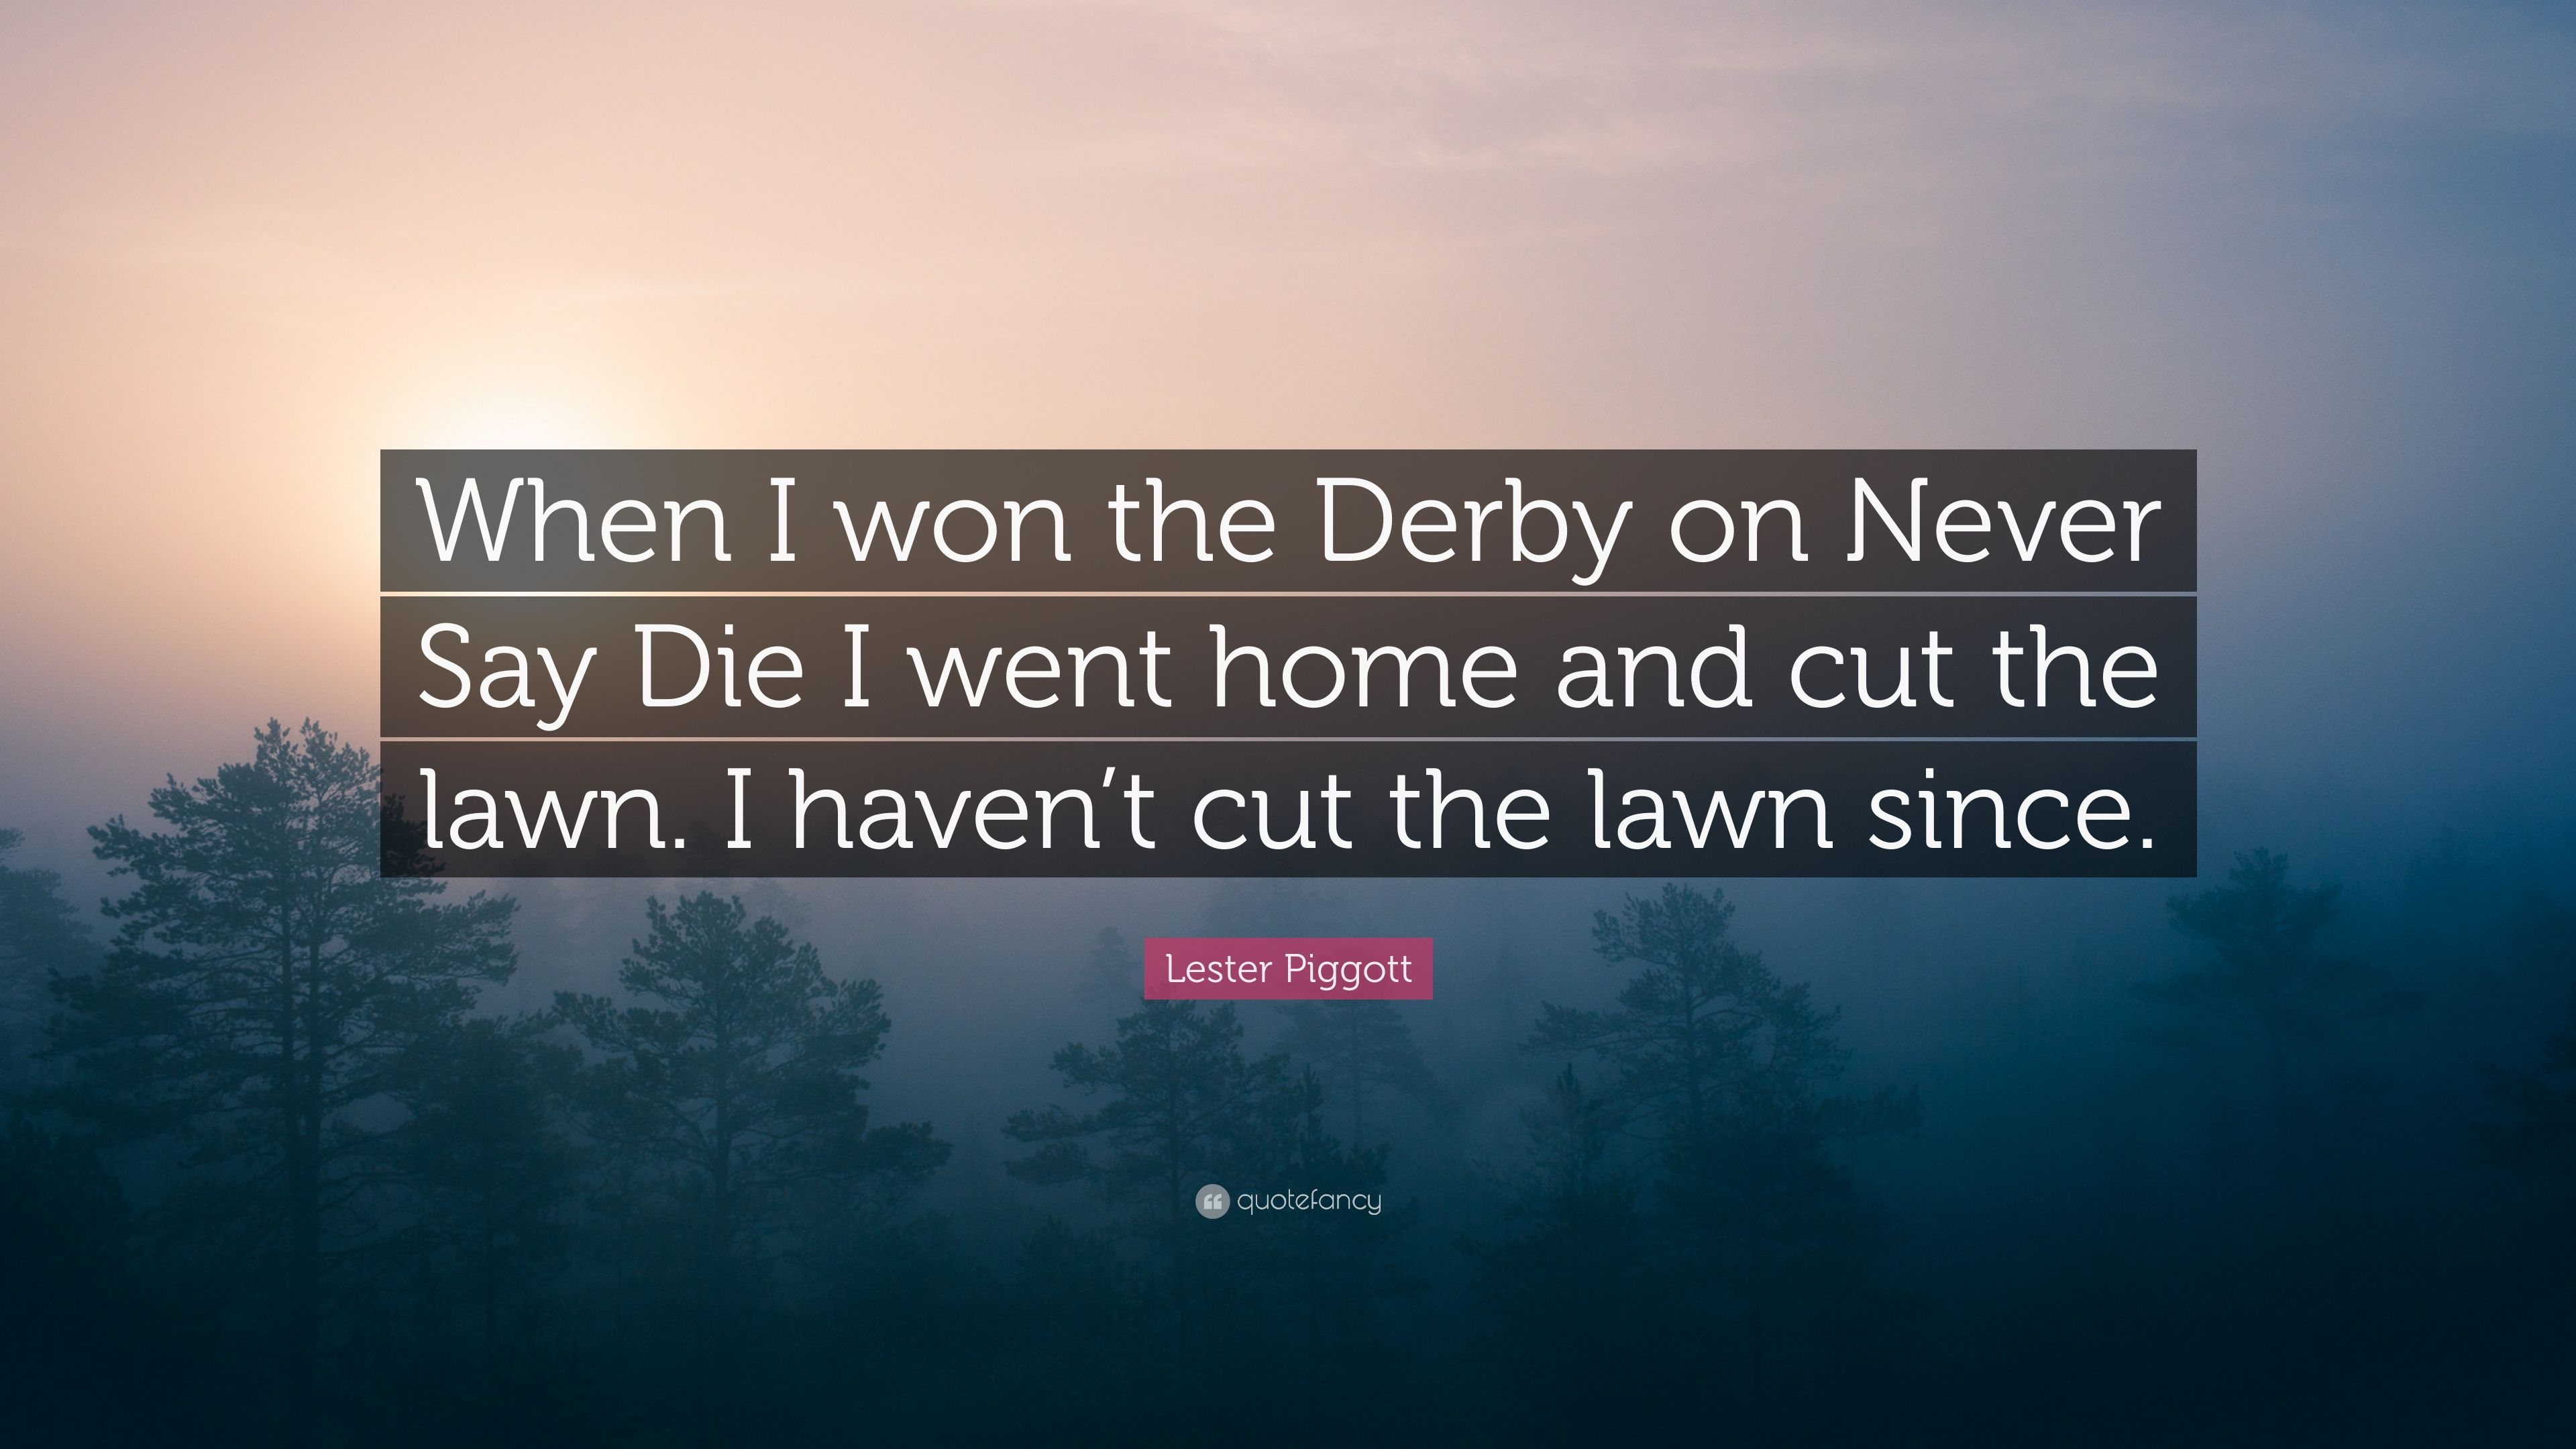 Lester Piggott Quote: “When I won the Derby on Never Say Die I